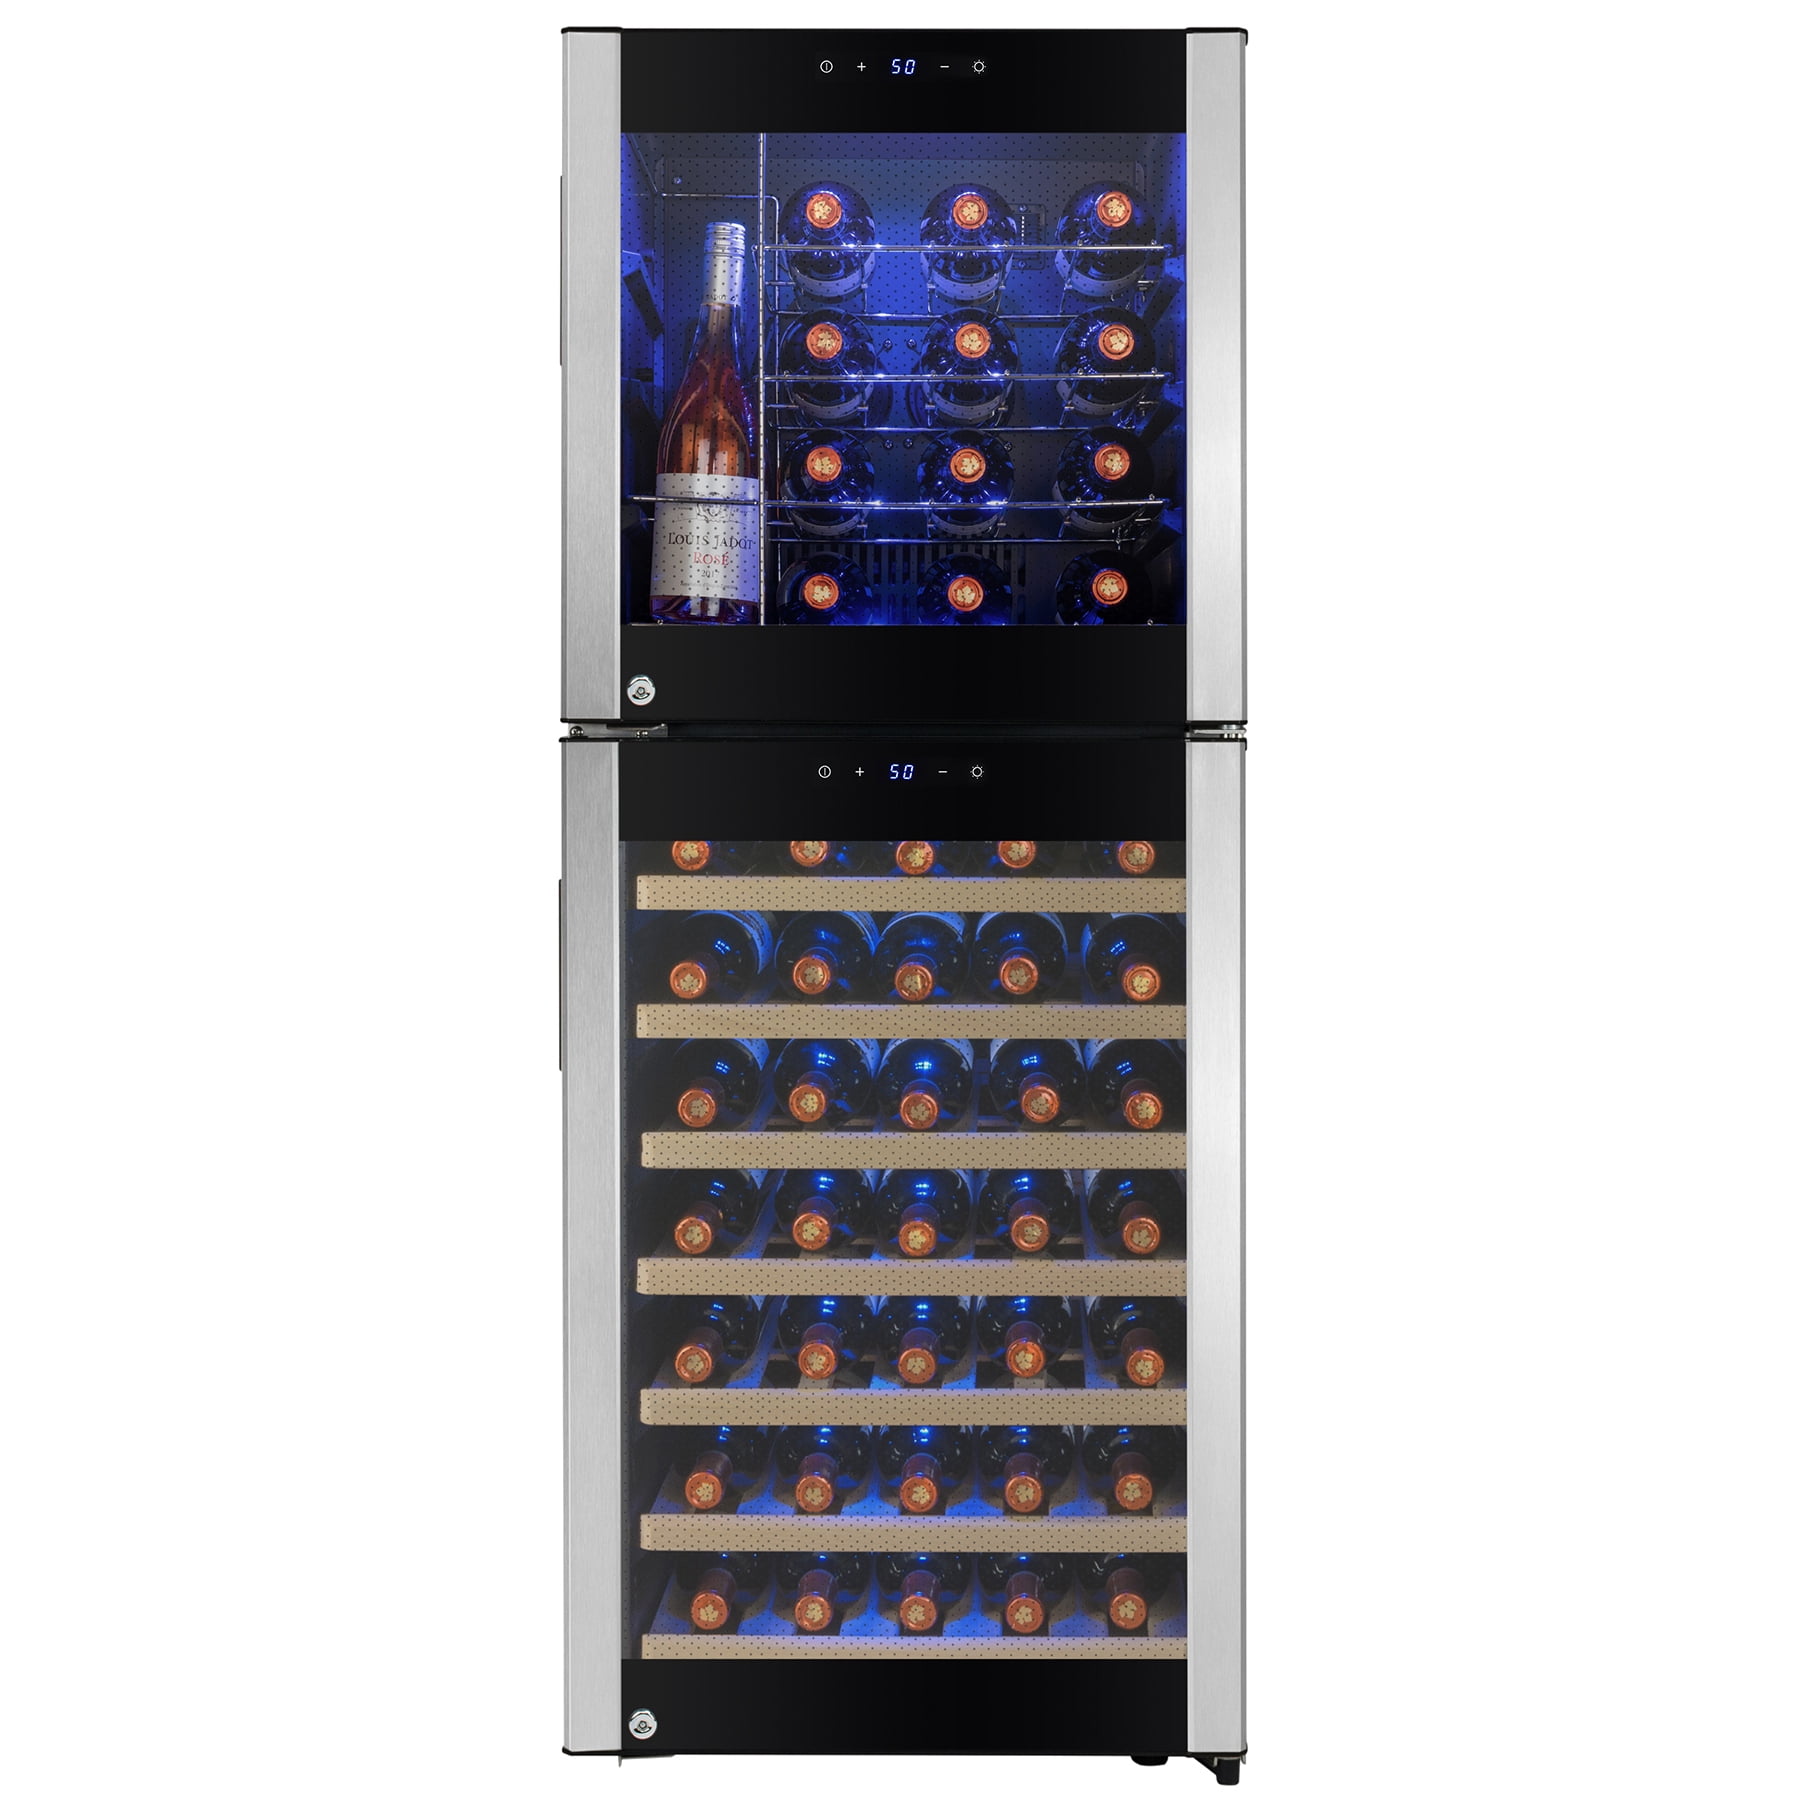 Key Lock Chrome Wire Dual Zone Touch Panel Temperature Control AKDY 16 Bottle Compressor Freestanding Wine Cooler Refrigerator 